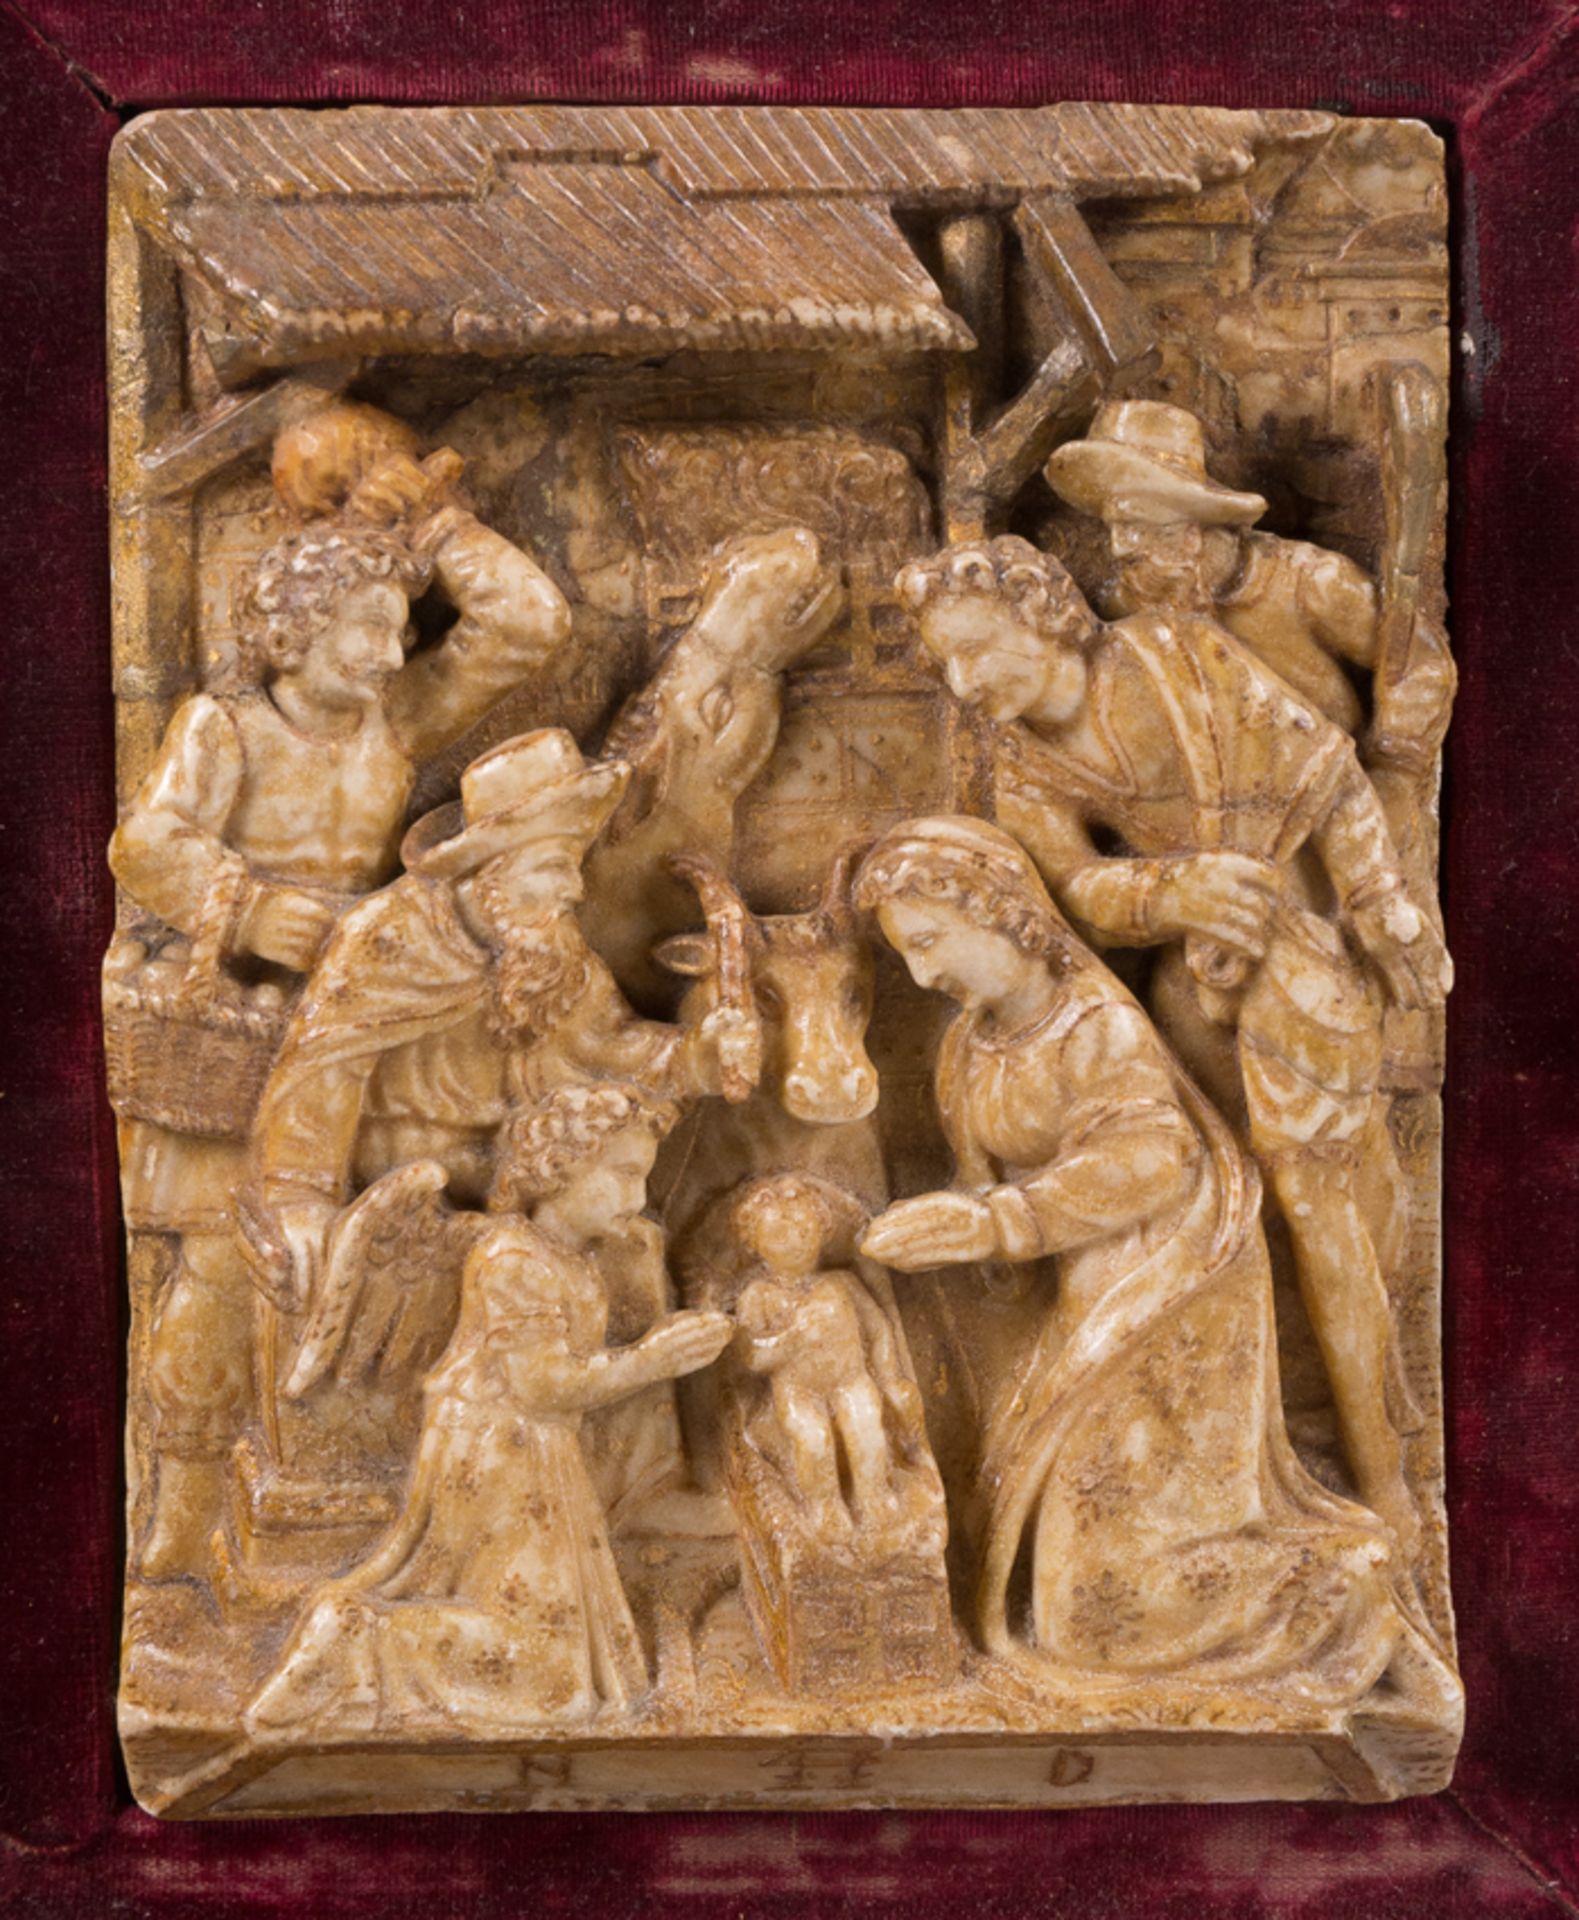 "The adoration of the shepherds". Alabaster relief with gild residue. Flemish School. 16th century.